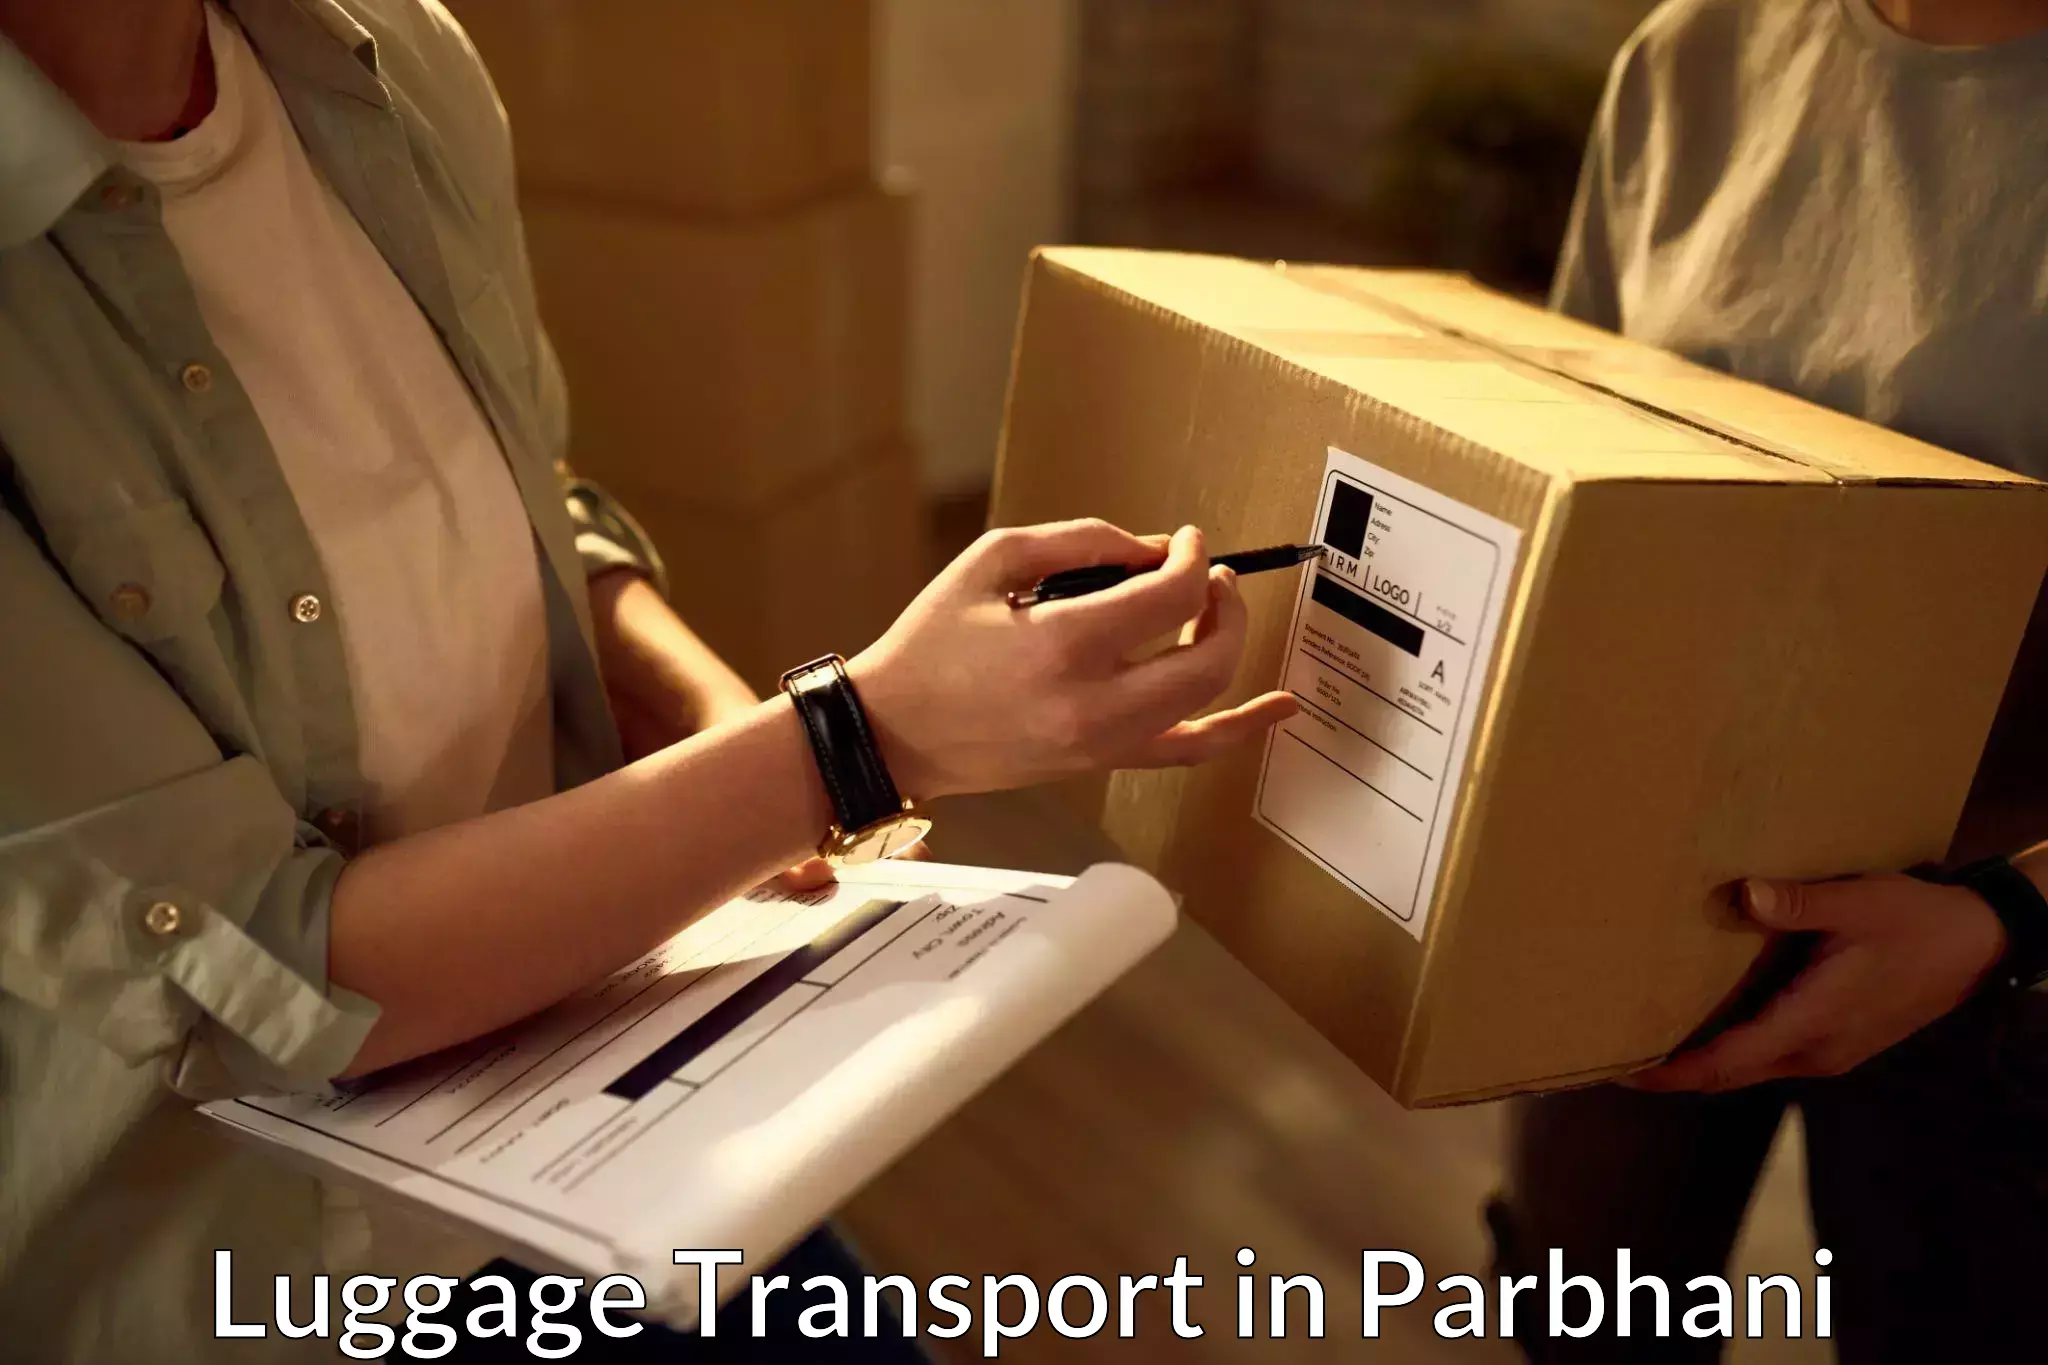 Student luggage transport in Parbhani